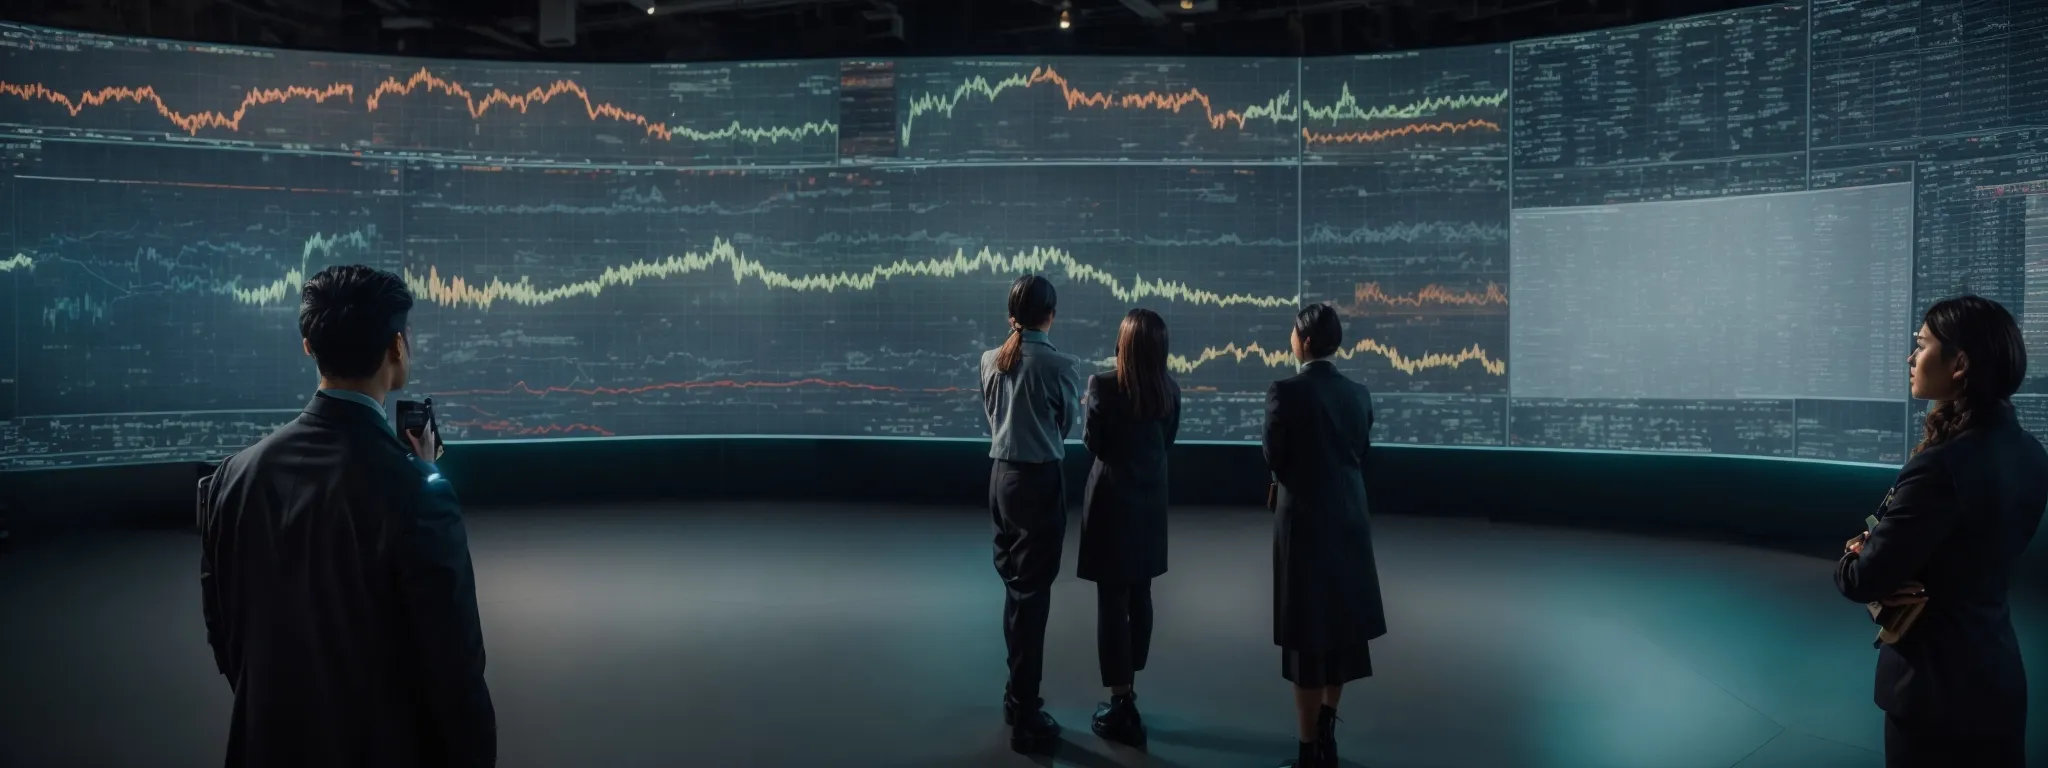 a team of professionals intently observing patterns on a large interactive display showing real-time market analytics.